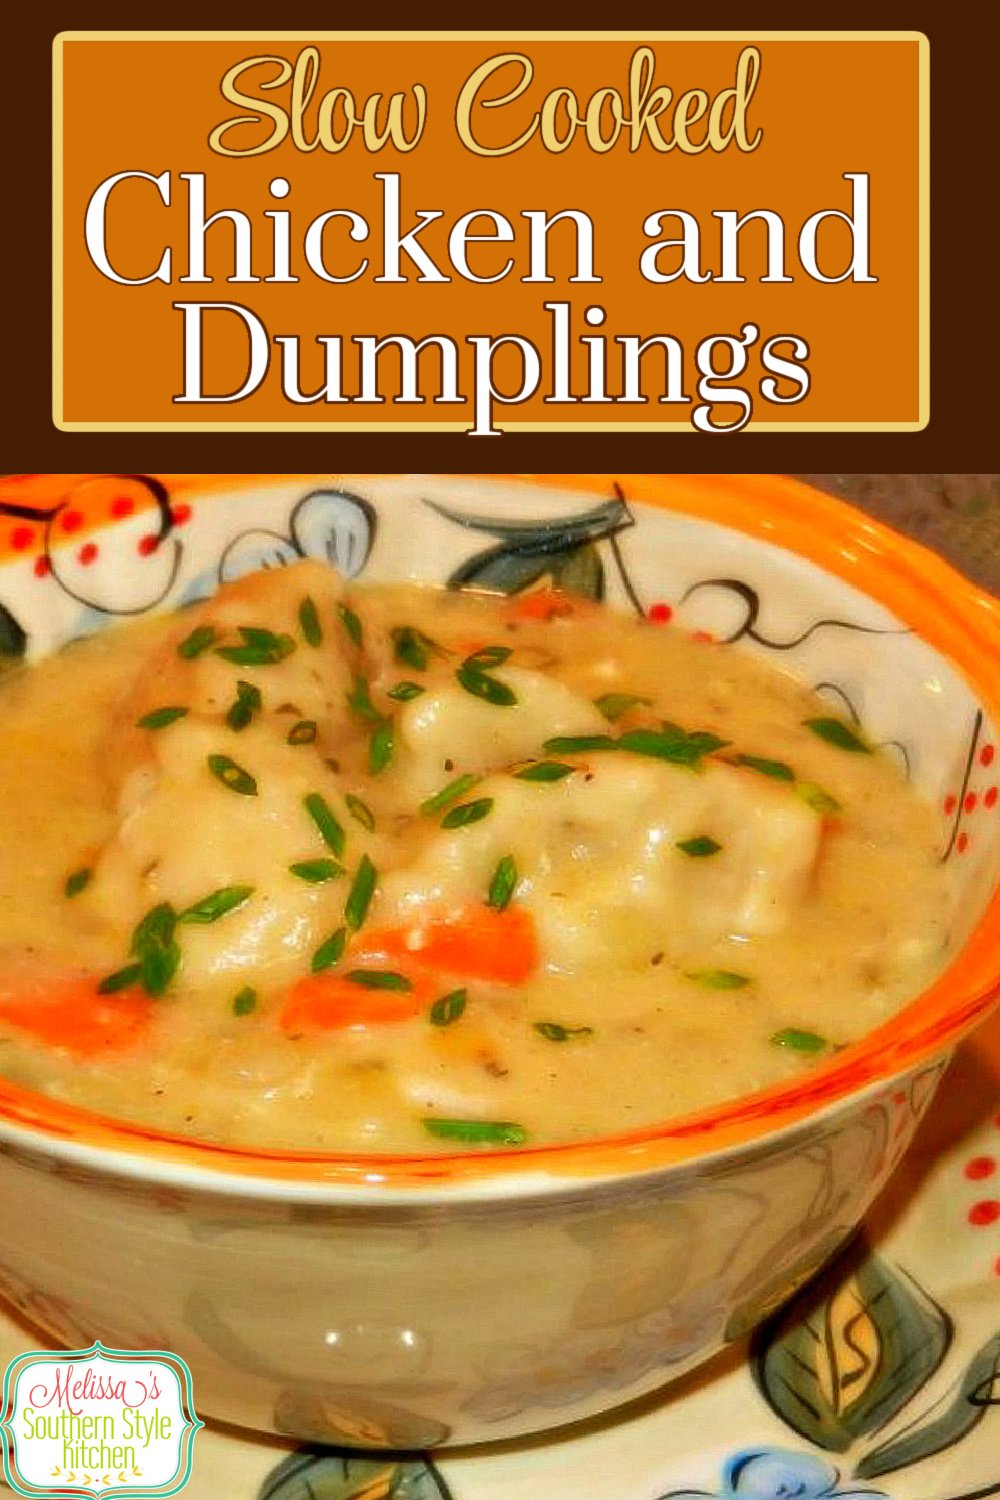 Make this comfort food classic in your slow cooker for supper any day of the week #chickenanddumplings #slowcooker #slowcookedchickenrecipes #easychickenrecipes #crockpotrecipes #crockpotchickenanddumplings #dinner 3dinnerideas #southernfood #southernrecipes #crockpotchicken #dumplings via @melissasssk